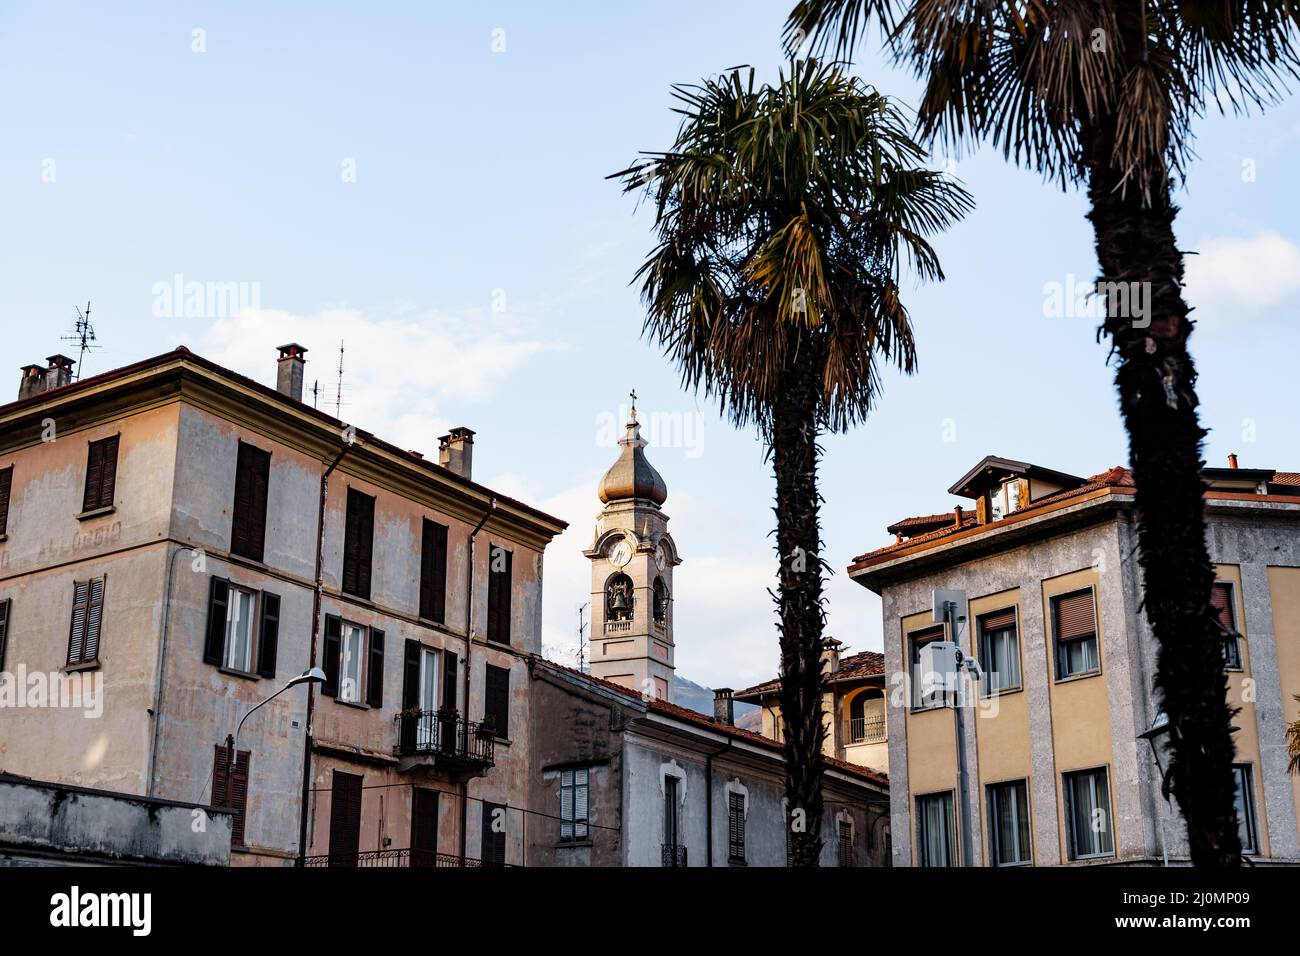 Bell tower among old houses and palm trees in the town of Menaggio. Lake Como, Italy Stock Photo